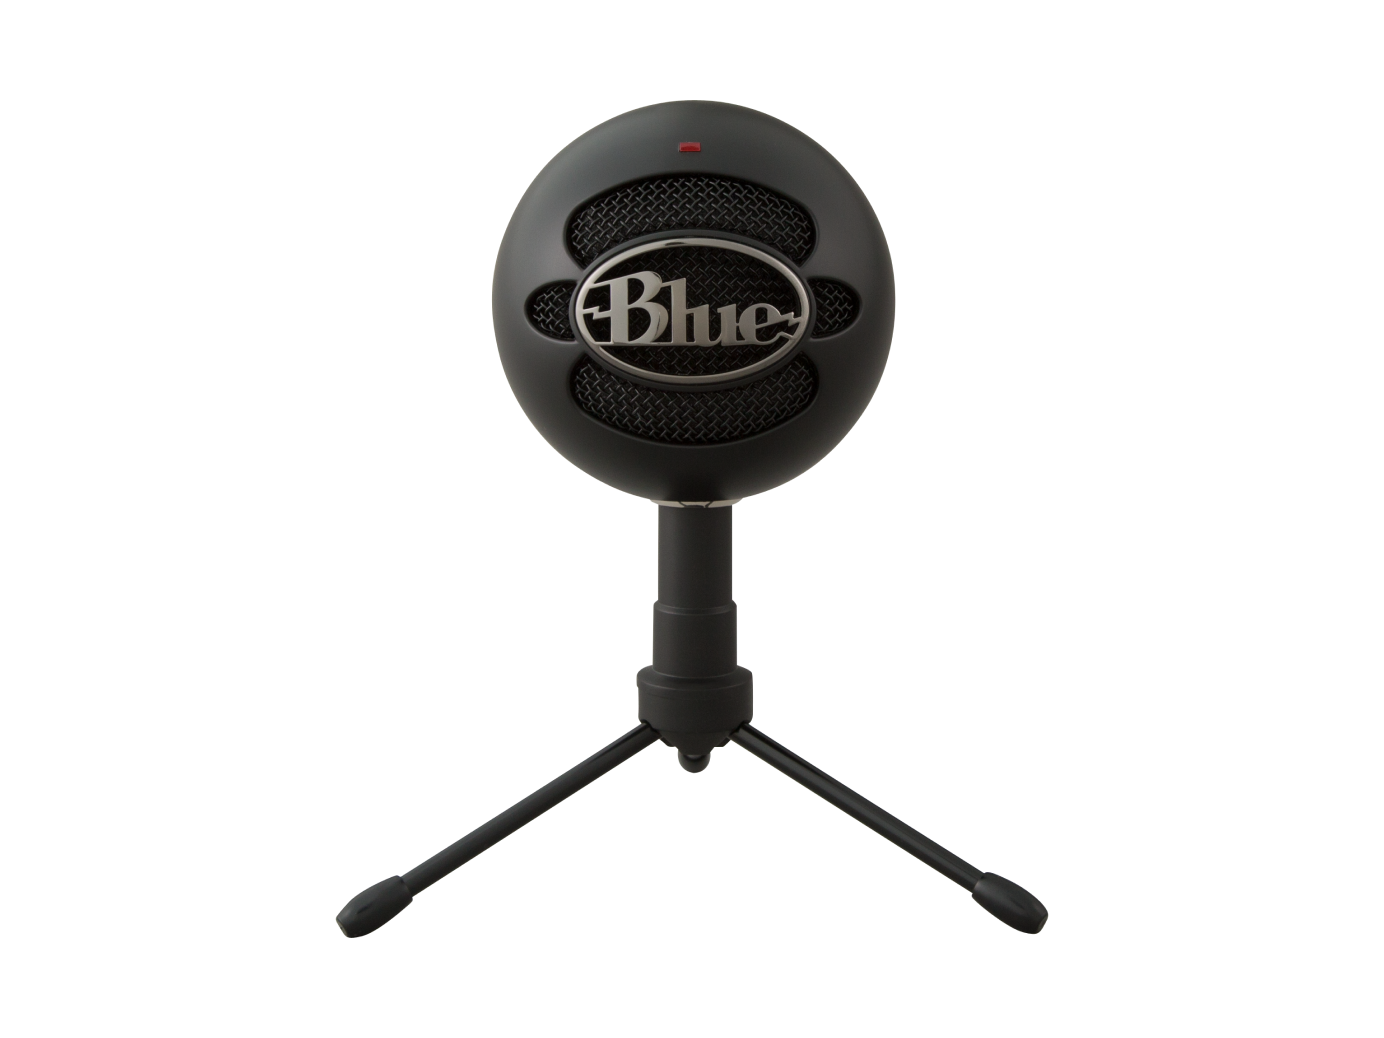  Logitech for Creators Blue Yeti USB Microphone for Gaming,  Streaming, Podcasting, Twitch, , Discord, Recording for PC and Mac,  4 Polar Patterns, Studio Quality Sound, Plug & Play-Silver : Musical  Instruments